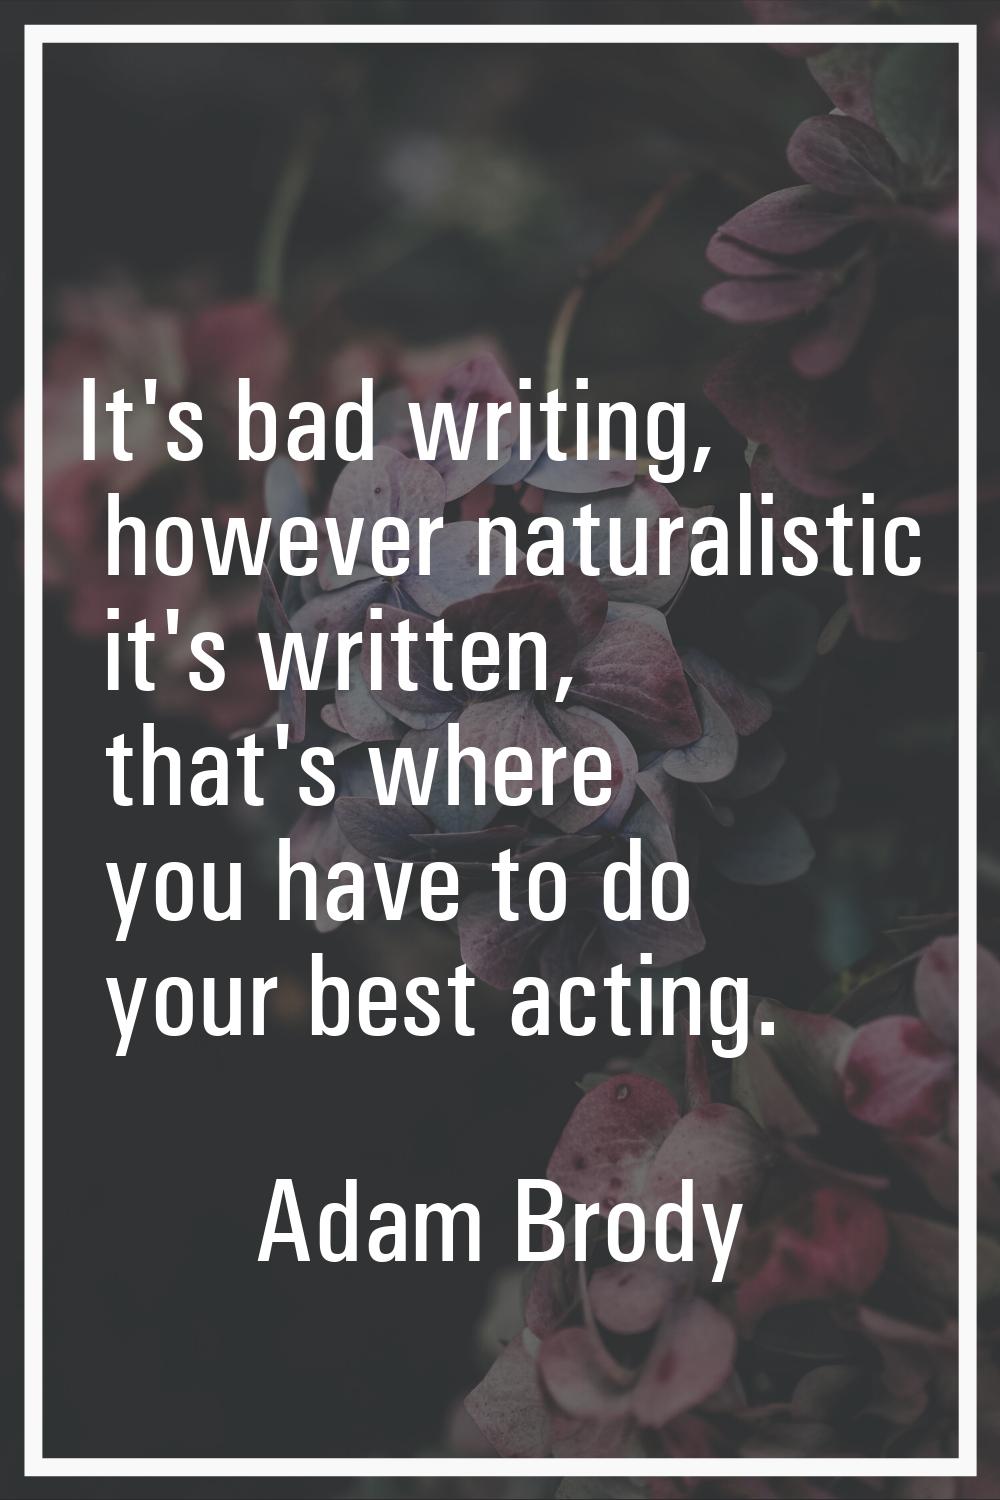 It's bad writing, however naturalistic it's written, that's where you have to do your best acting.